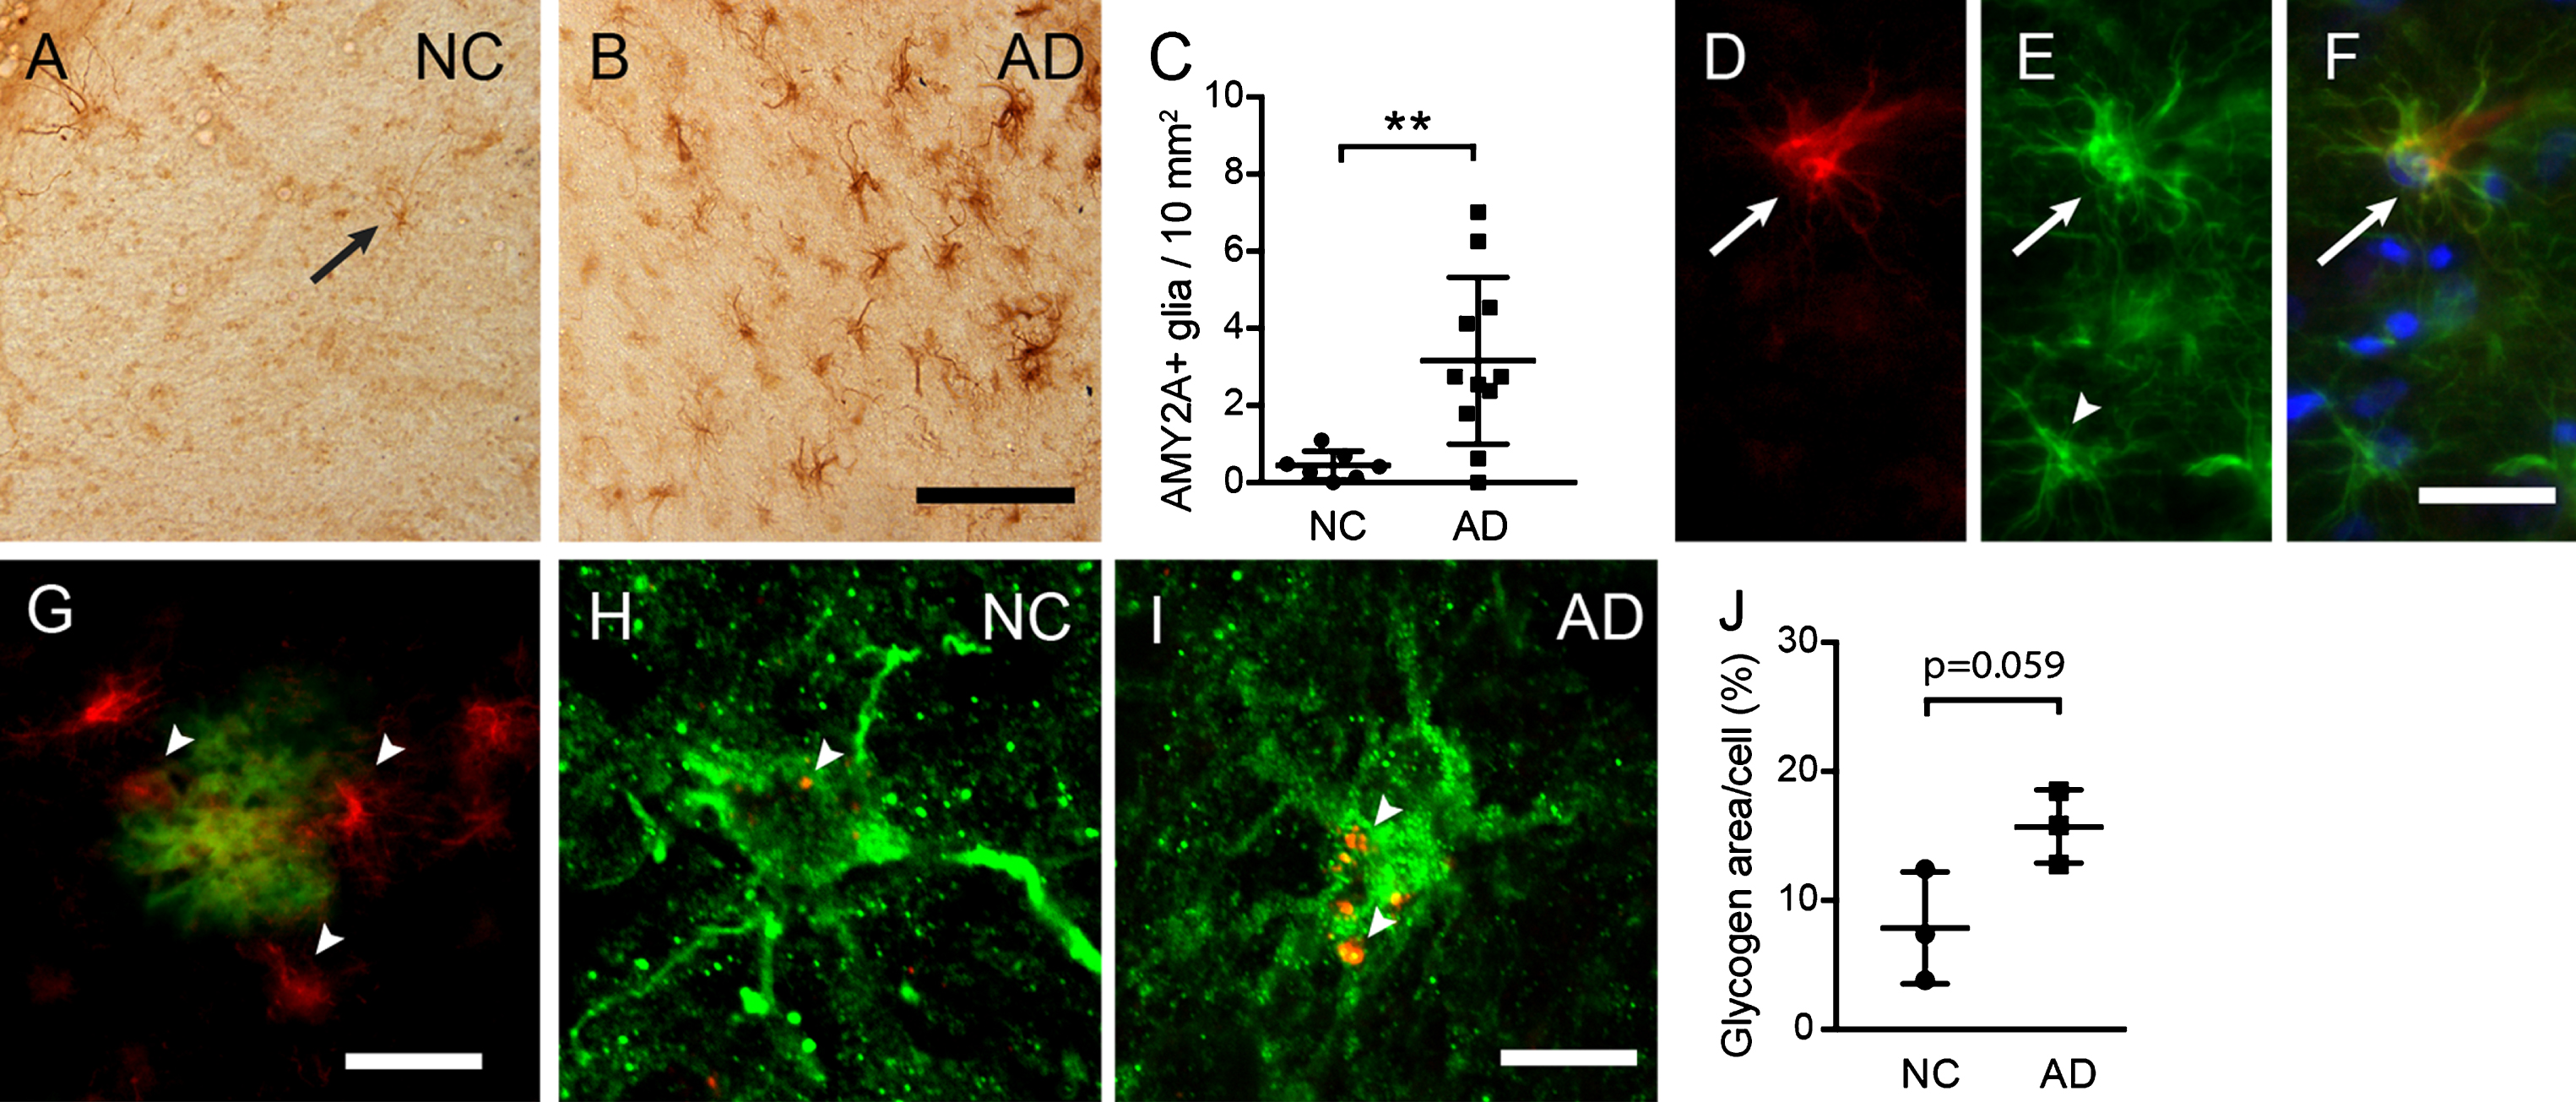 Increased astrocytic α-amylase immunoreactivity and glycogen load in AD patients. Image in (A) illustrates an AMY2A immunostaining of entorhinal cortex (EC) in a representative NC (arrow indicates an AMY2A positive glial cell). The number of strongly AMY2A+glial cells was significantly higher in AD (n = 12) compared to NC (n = 8), which is illustrated in image (B) and the column scatter plot in (C). The AMY2A glial cells (red in D) co-expressed GFAP (green in E) (D merged with E and blue DAPI staining in F) and were found primarily in astrocytes with a hypertrophic morphology (arrow in D–F), and less in astrocytes with a resting morphology (arrowhead in E). The AMY2A+glial cells (red indicated with arrowheads in G) were commonly seen adjacent to Aβ plaques (green in G). Confocal images in (H-I) demonstrate a double staining against AMY2A (in green) and glycogen (in red indicate with arrowheads in H and I), where the glycogen load in NC (H) is less pronounced compared to AD (I). The column scatter plot in (J) shows an on boarder significant increase of glycogen area/cell percentage in AMY2A+cells (n = 5) of AD patients (n = 3) (in total 15 cells) compared to glycogen area/cell in AMY2A+cells (n = 5) of NC (n = 3) (in total 15 cells). Data was analyzed using student t-test and presented as mean±SD. **p > 0.01. Scalebar A and B = 40, D–F = 15, G = 25, H and I = 5r μm.